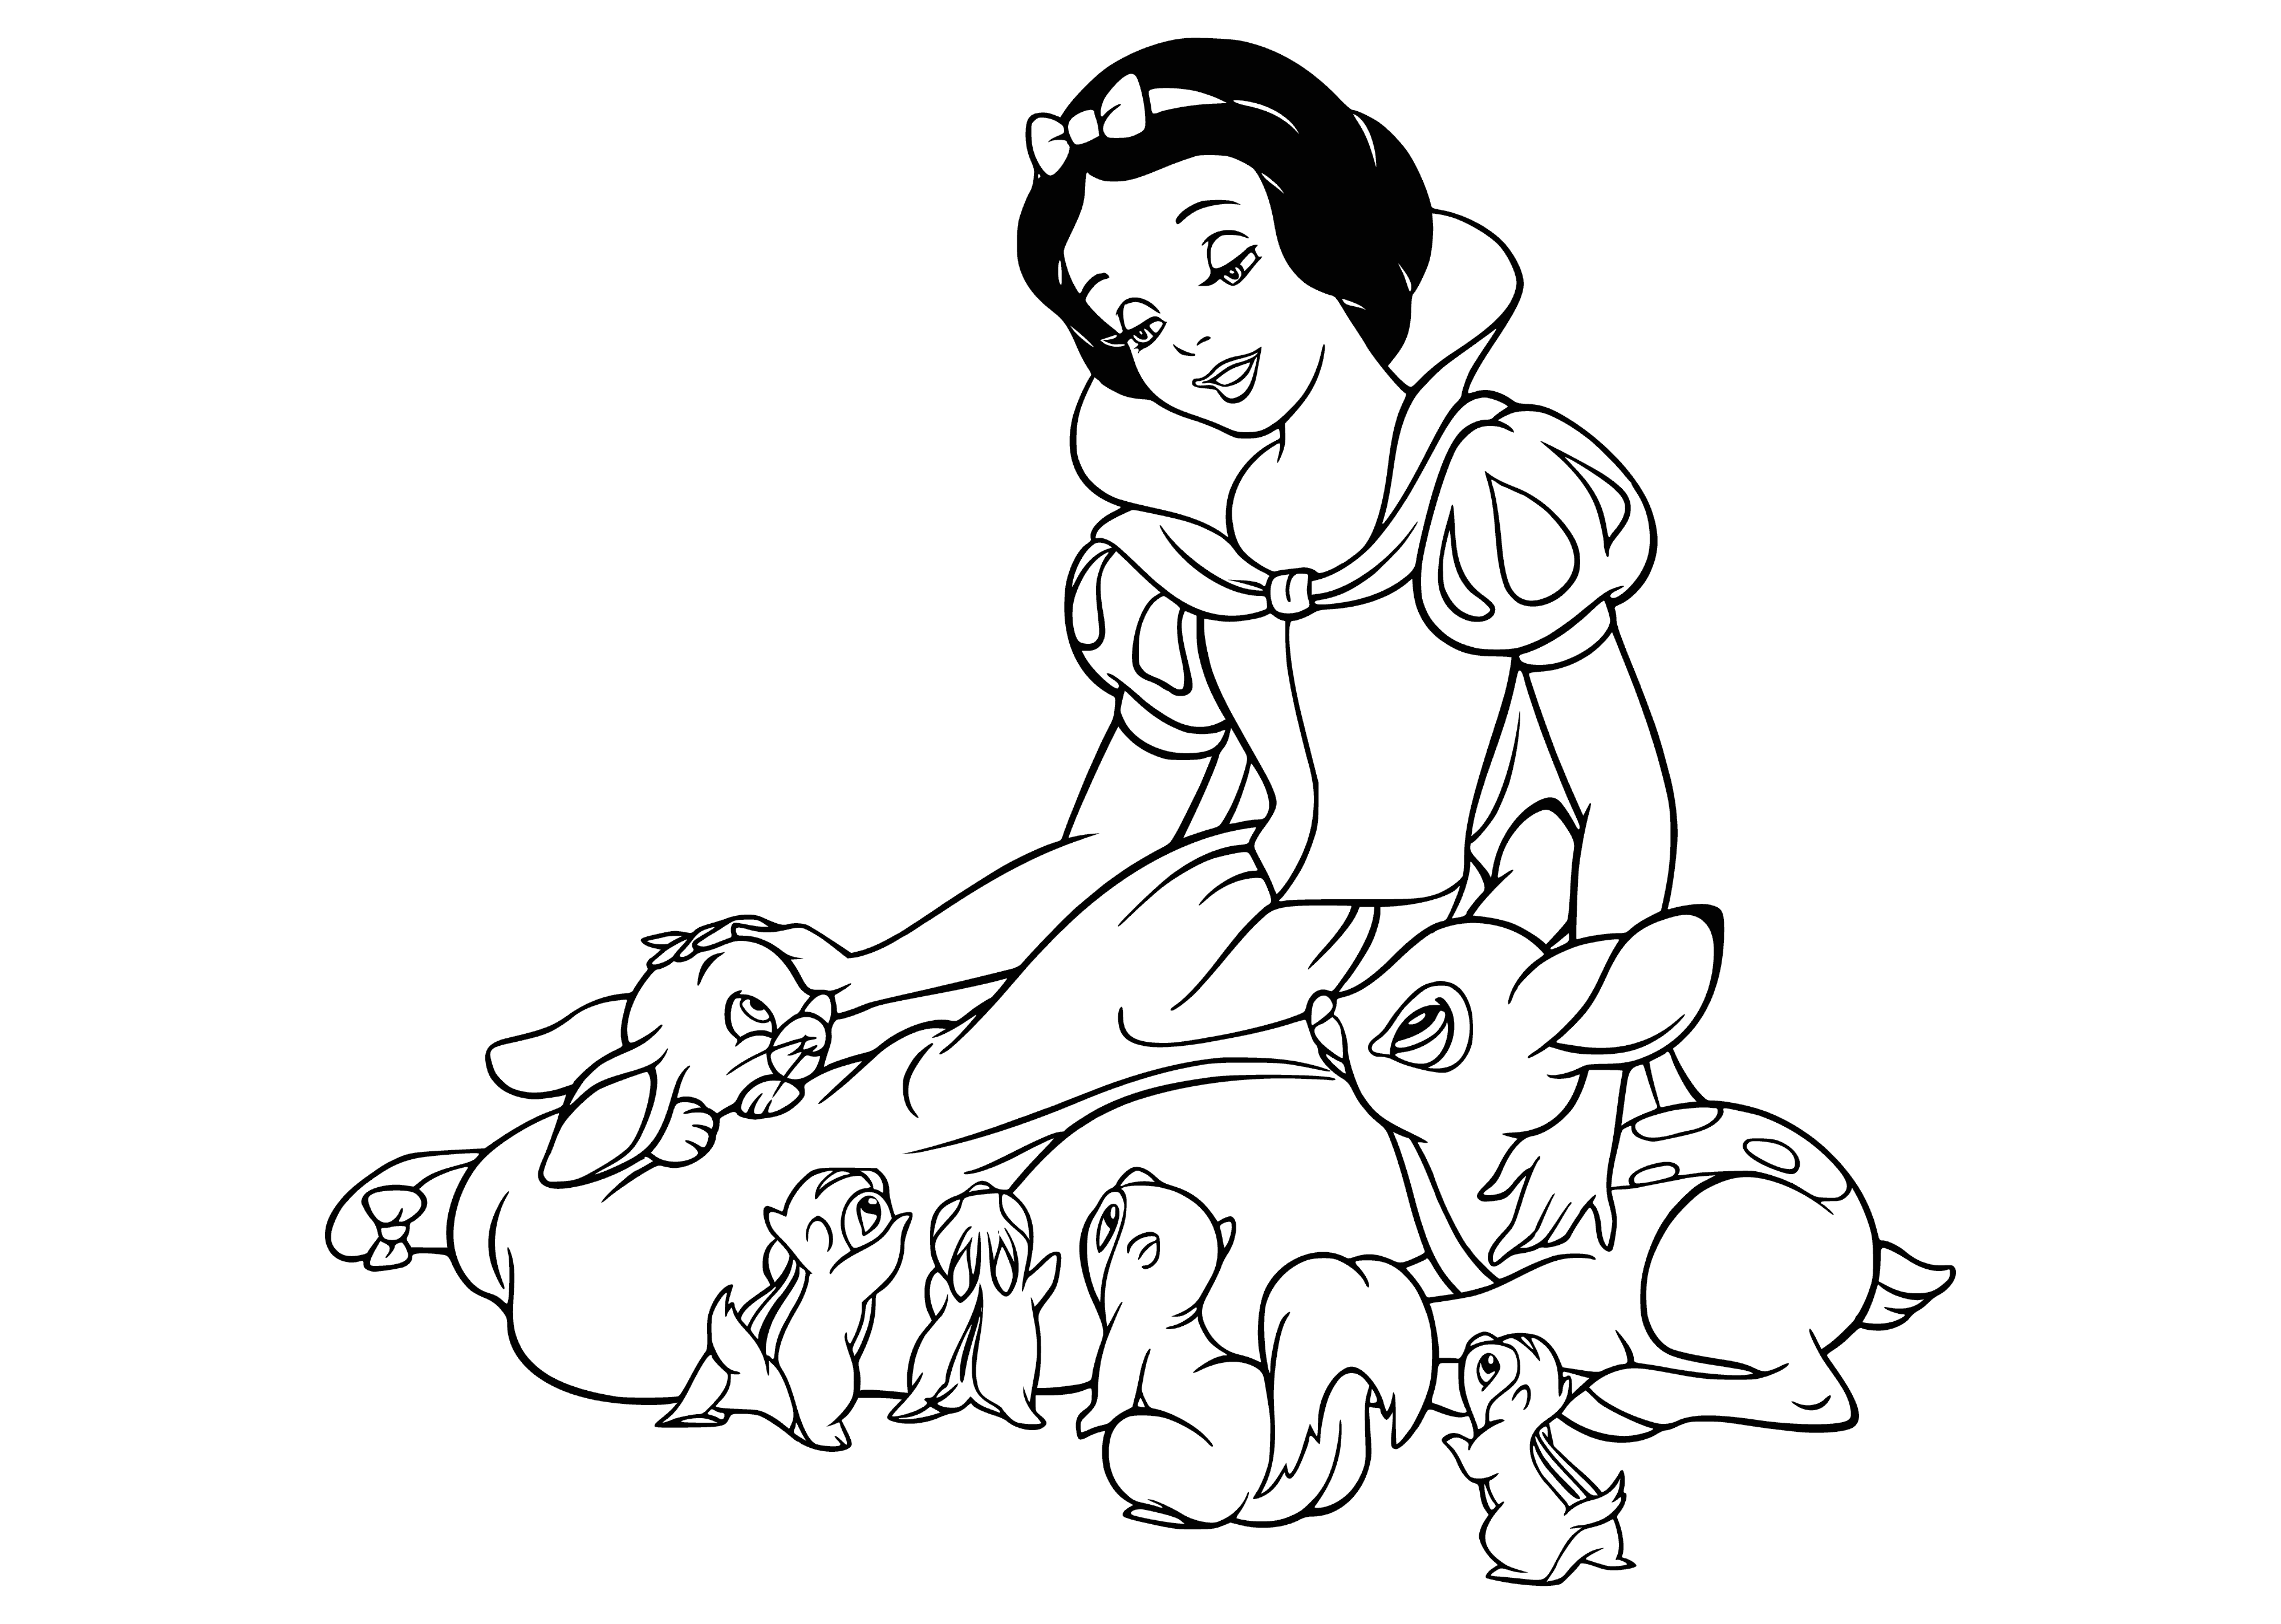 Snow White strokes forest animals coloring page